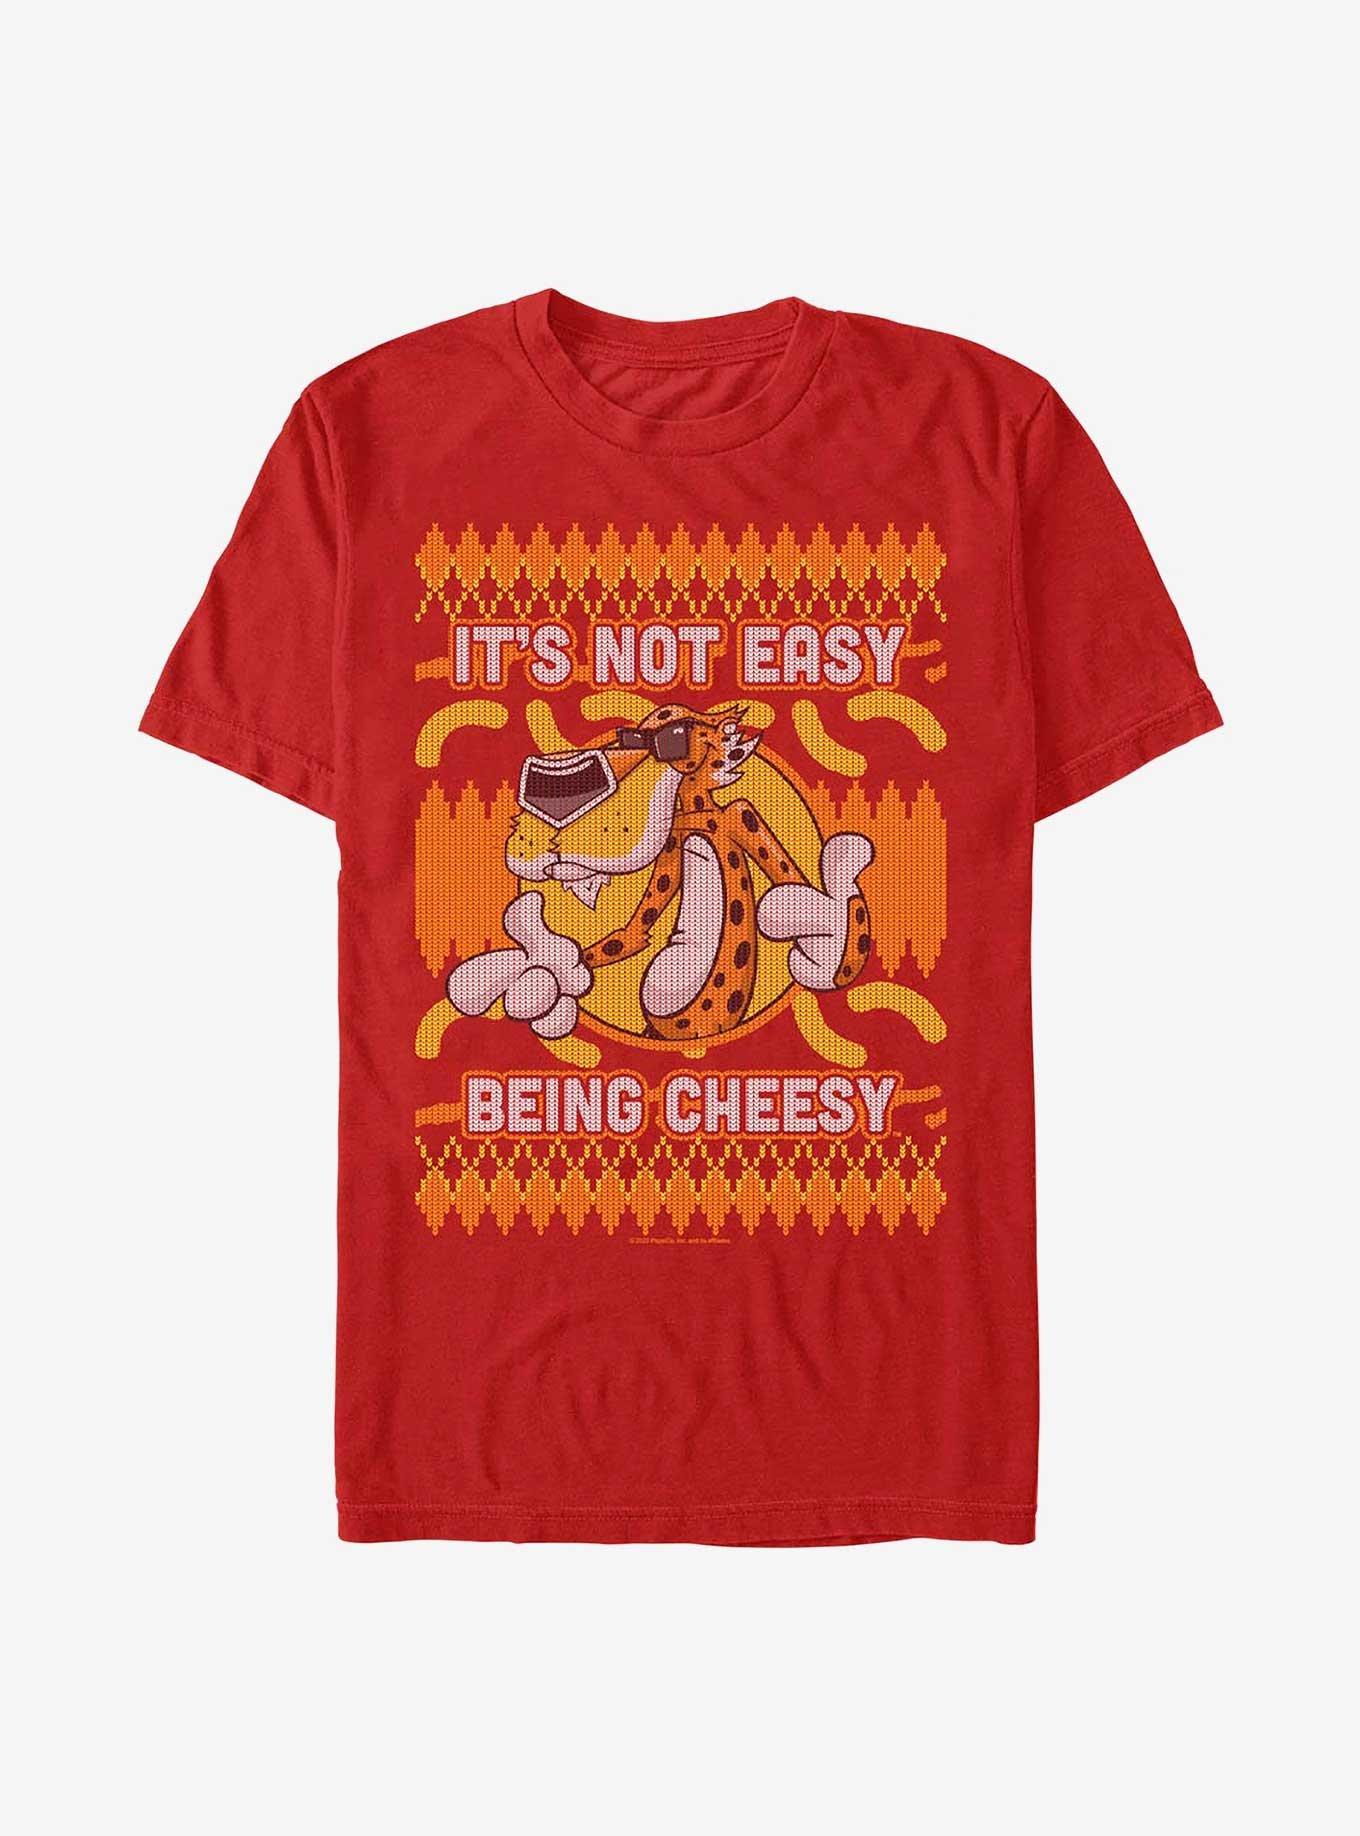 Cheetos Chester Cheetah Ugly Christmas Sweater Pattern T-Shirt, RED, hi-res